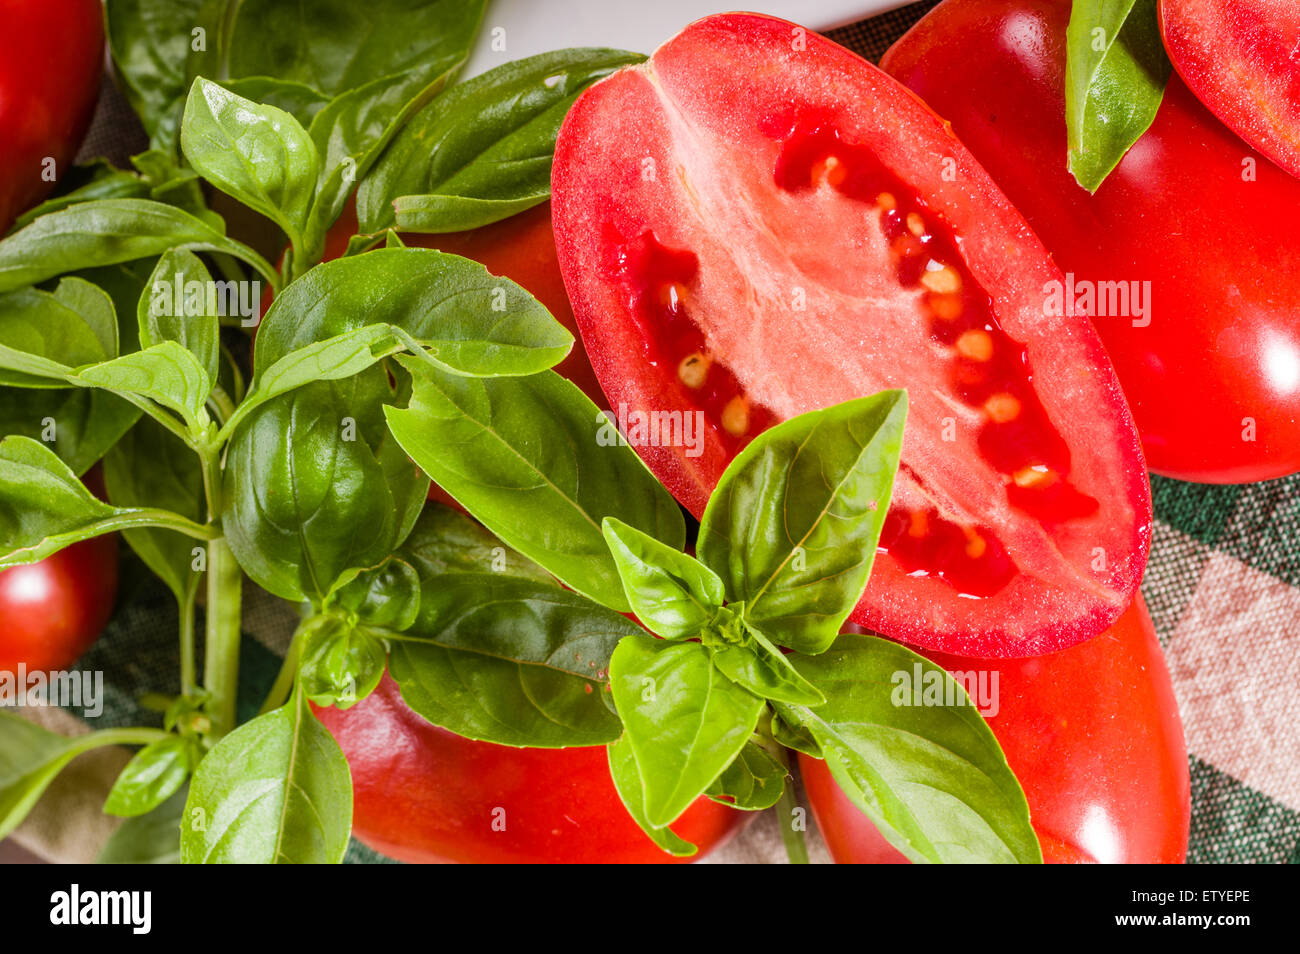 Cut paste tomatoes with basil Stock Photo